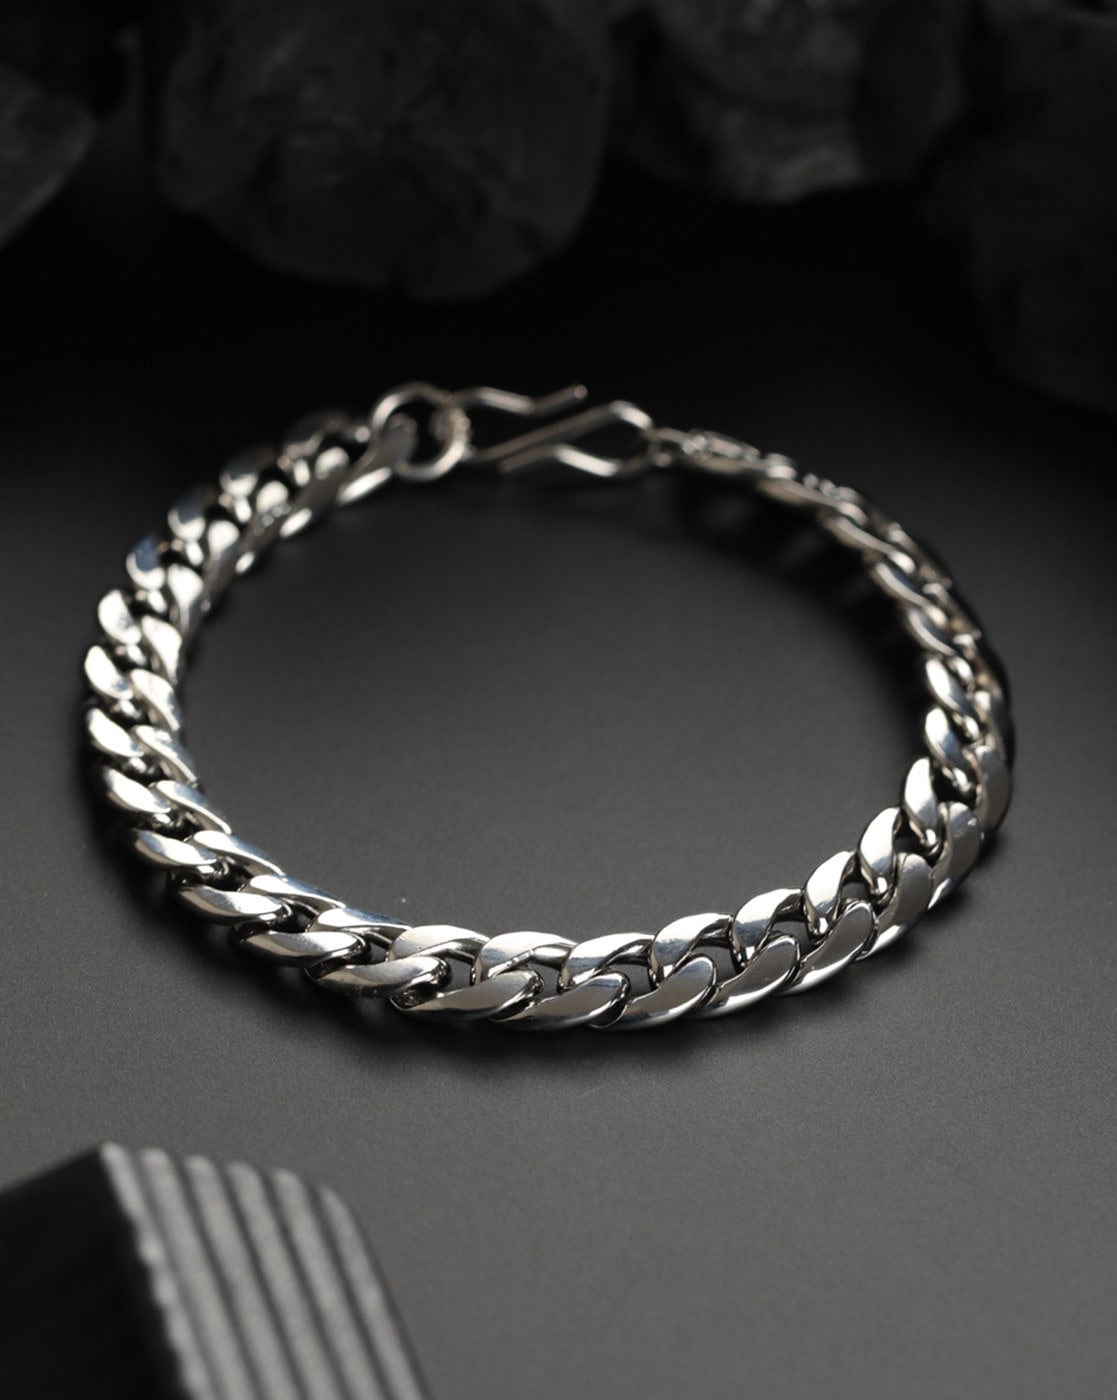 Silver Curb Chain Bracelet with a Hook Clasp  Silvertraits